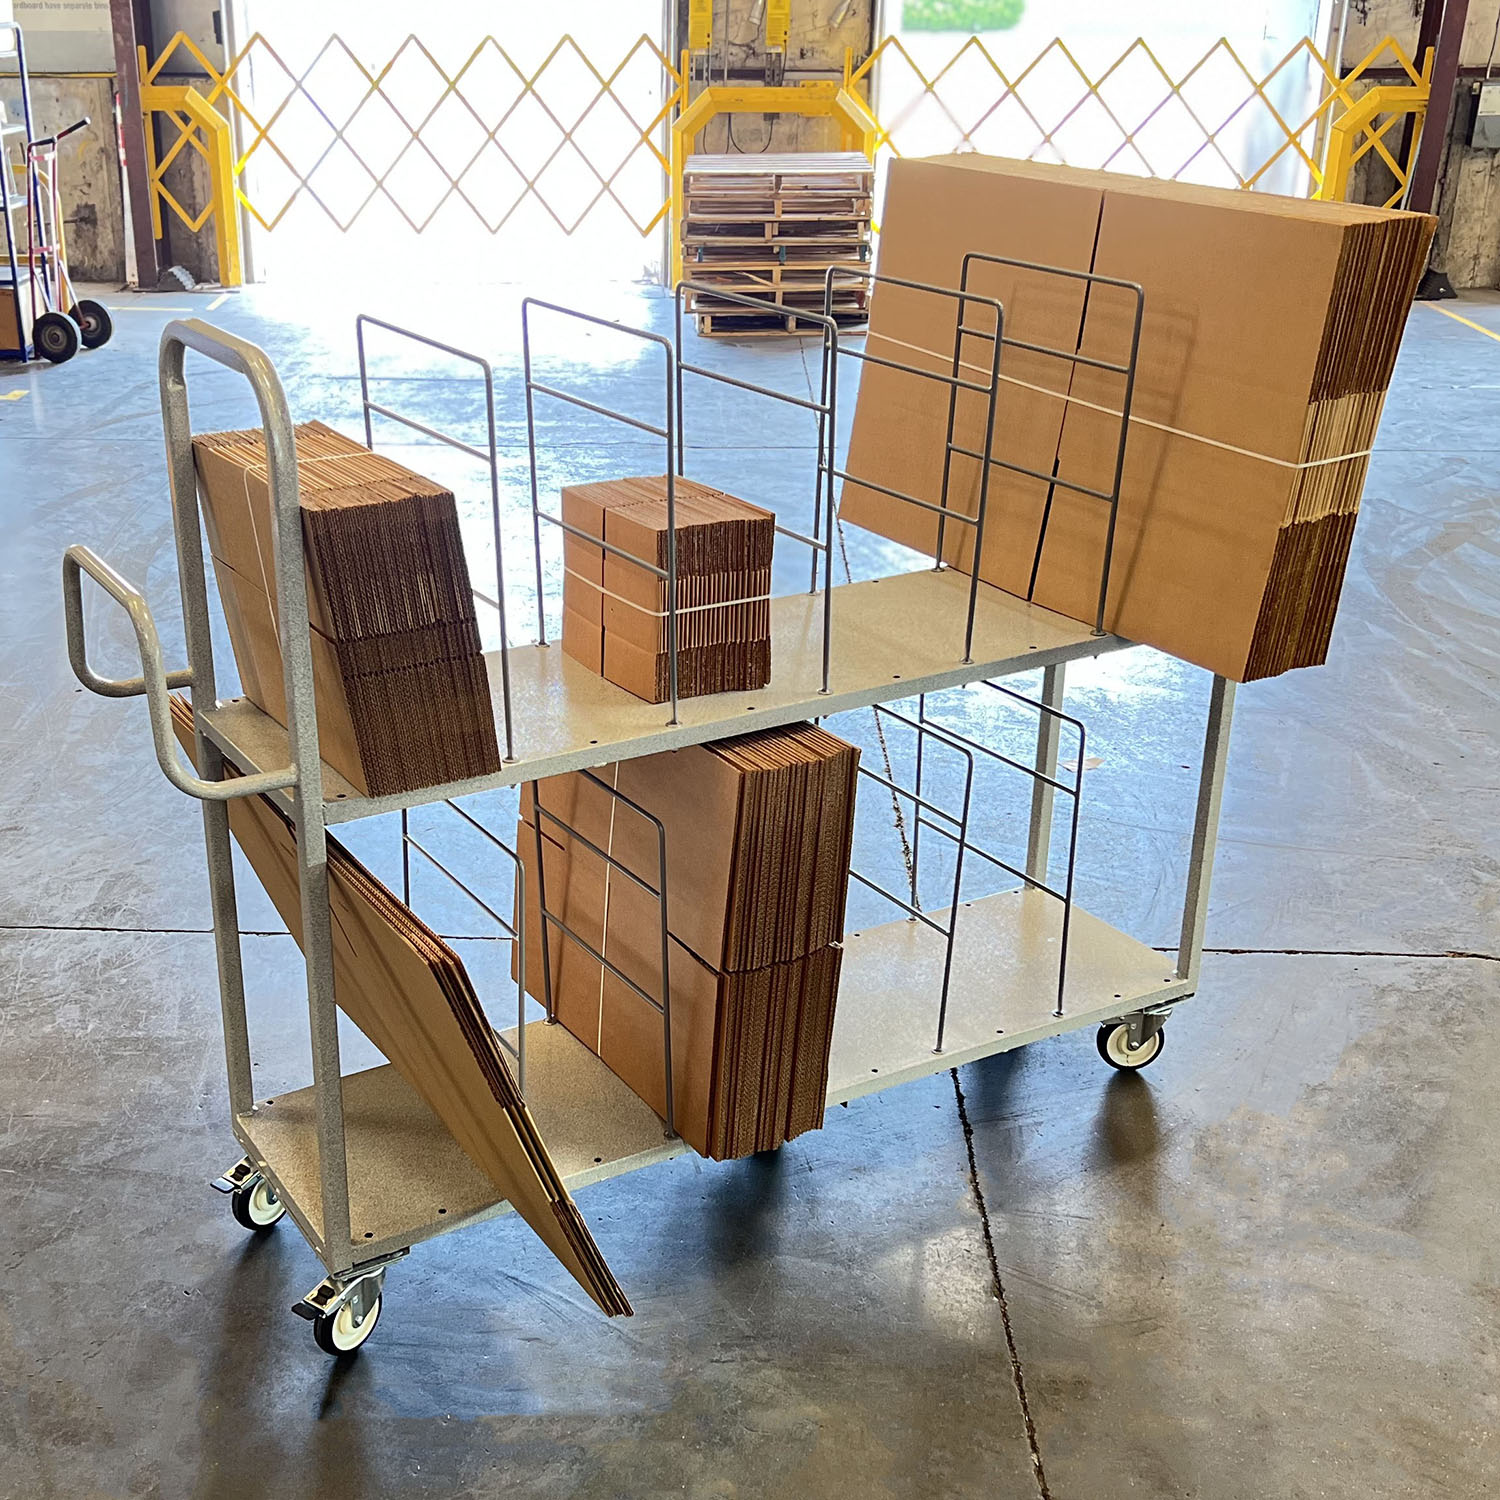 Water Spider Carts help organize, store, and transport empty cardboard boxes.